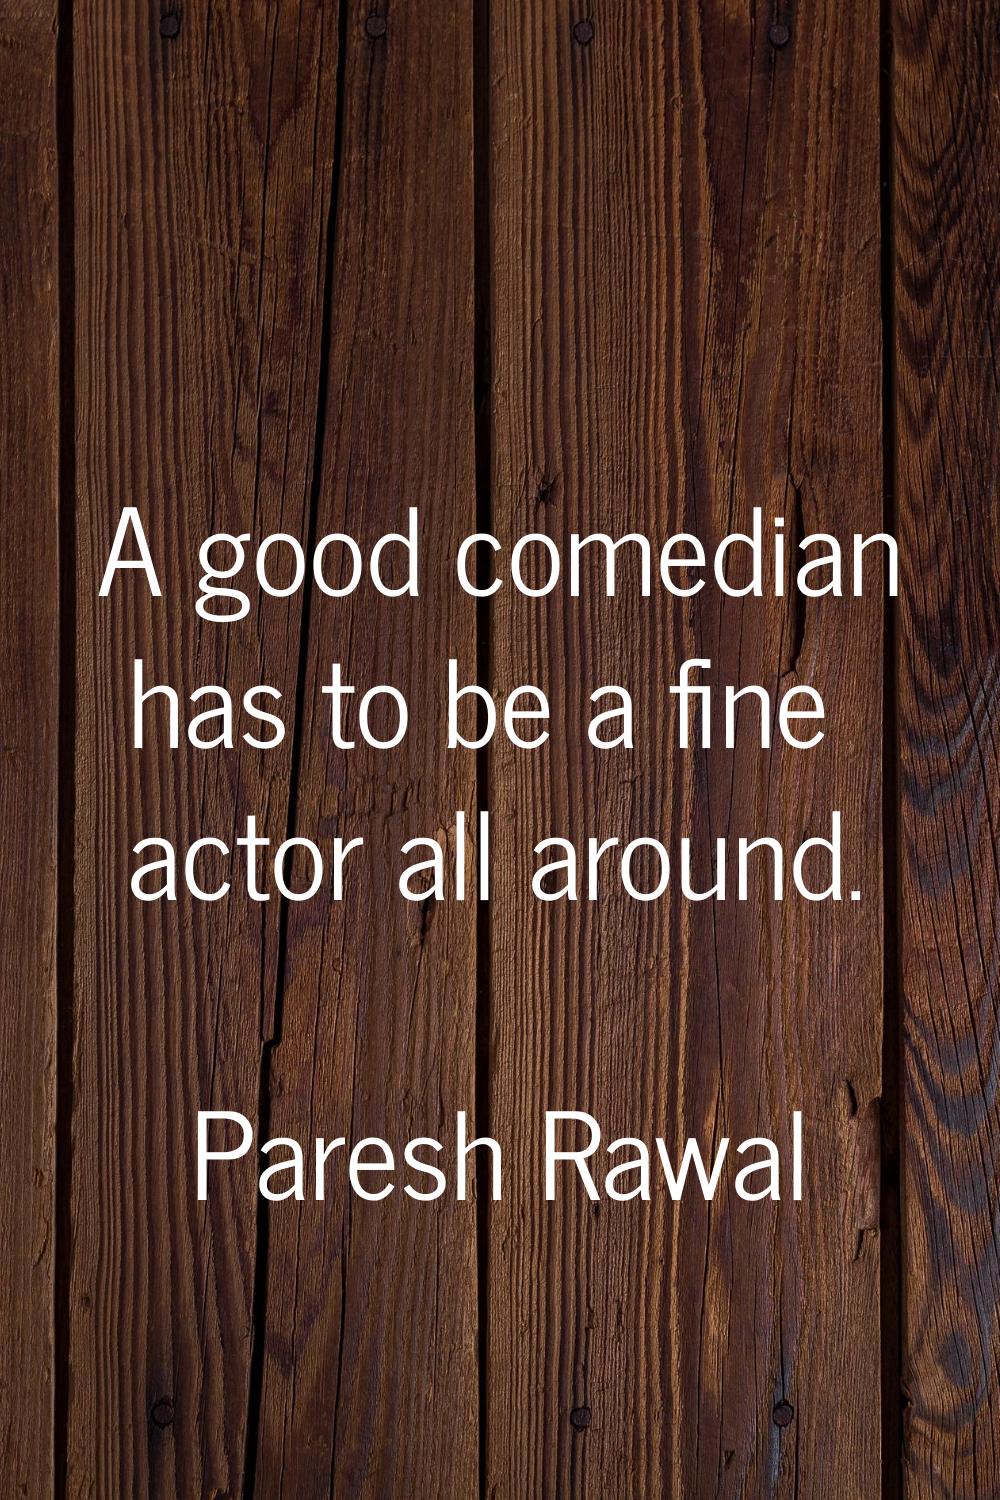 A good comedian has to be a fine actor all around.